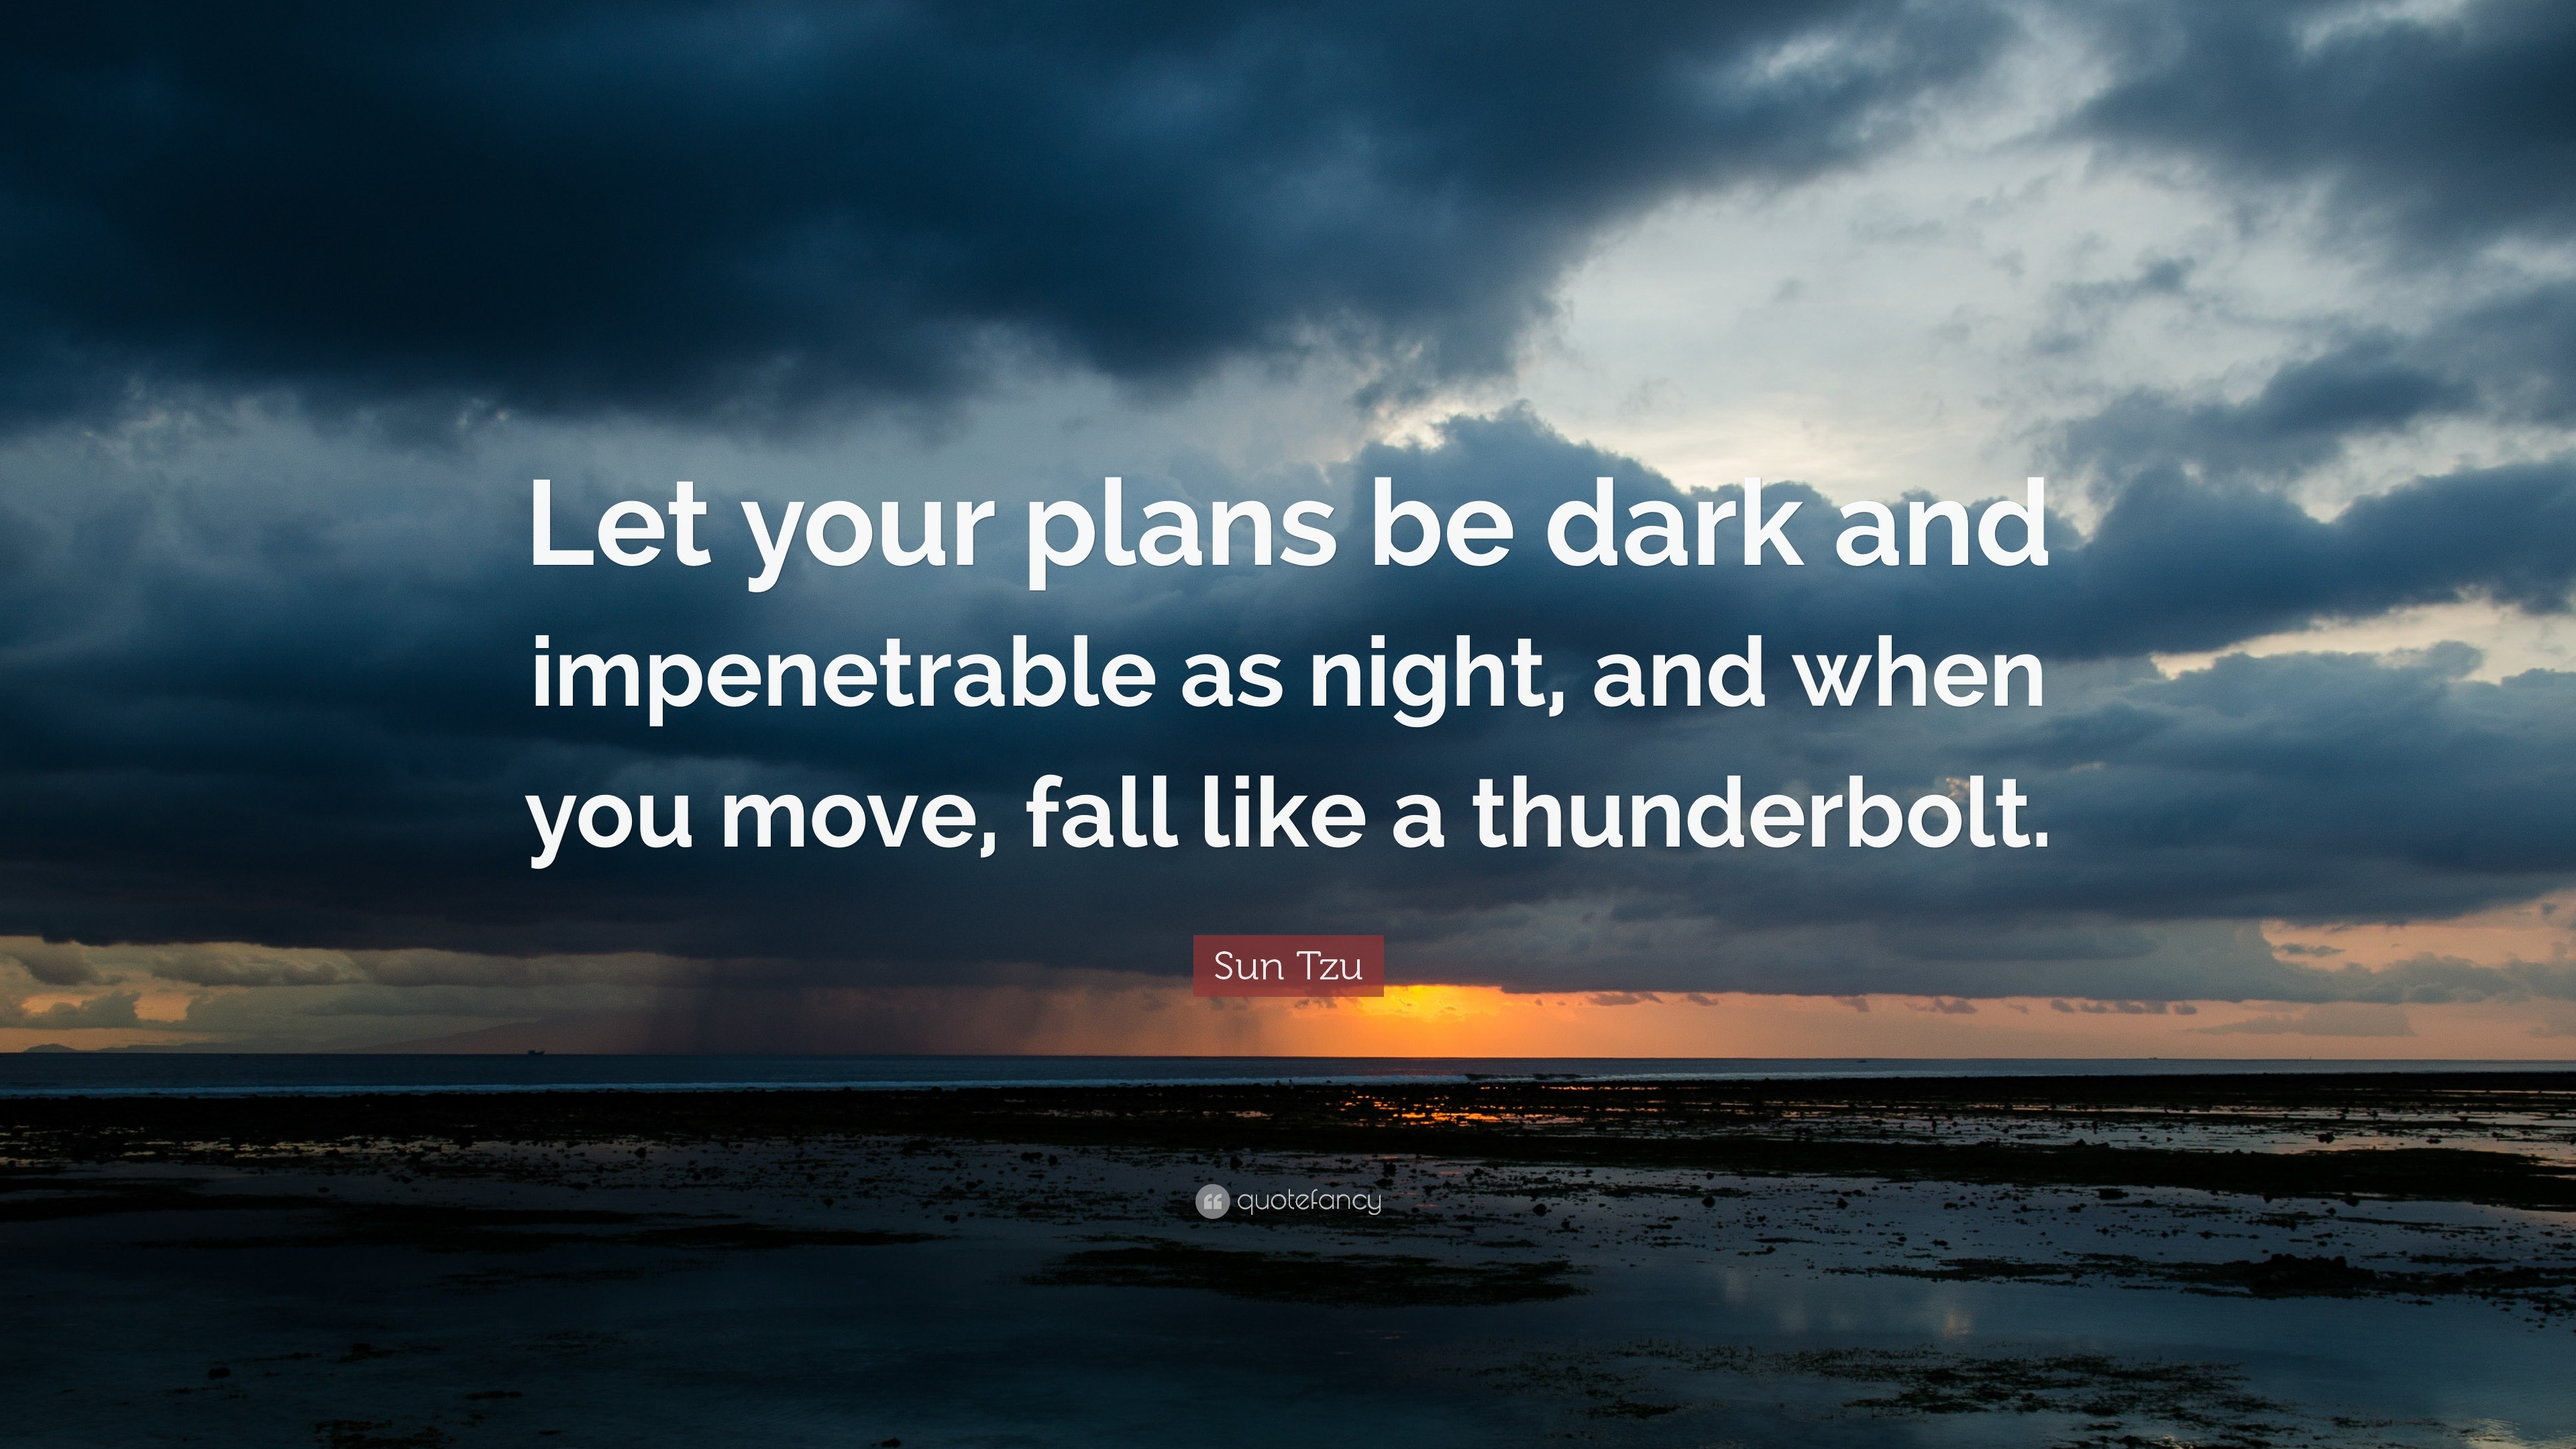 Sun Tzu Quote: “Let your plans be dark and impenetrable as night, and